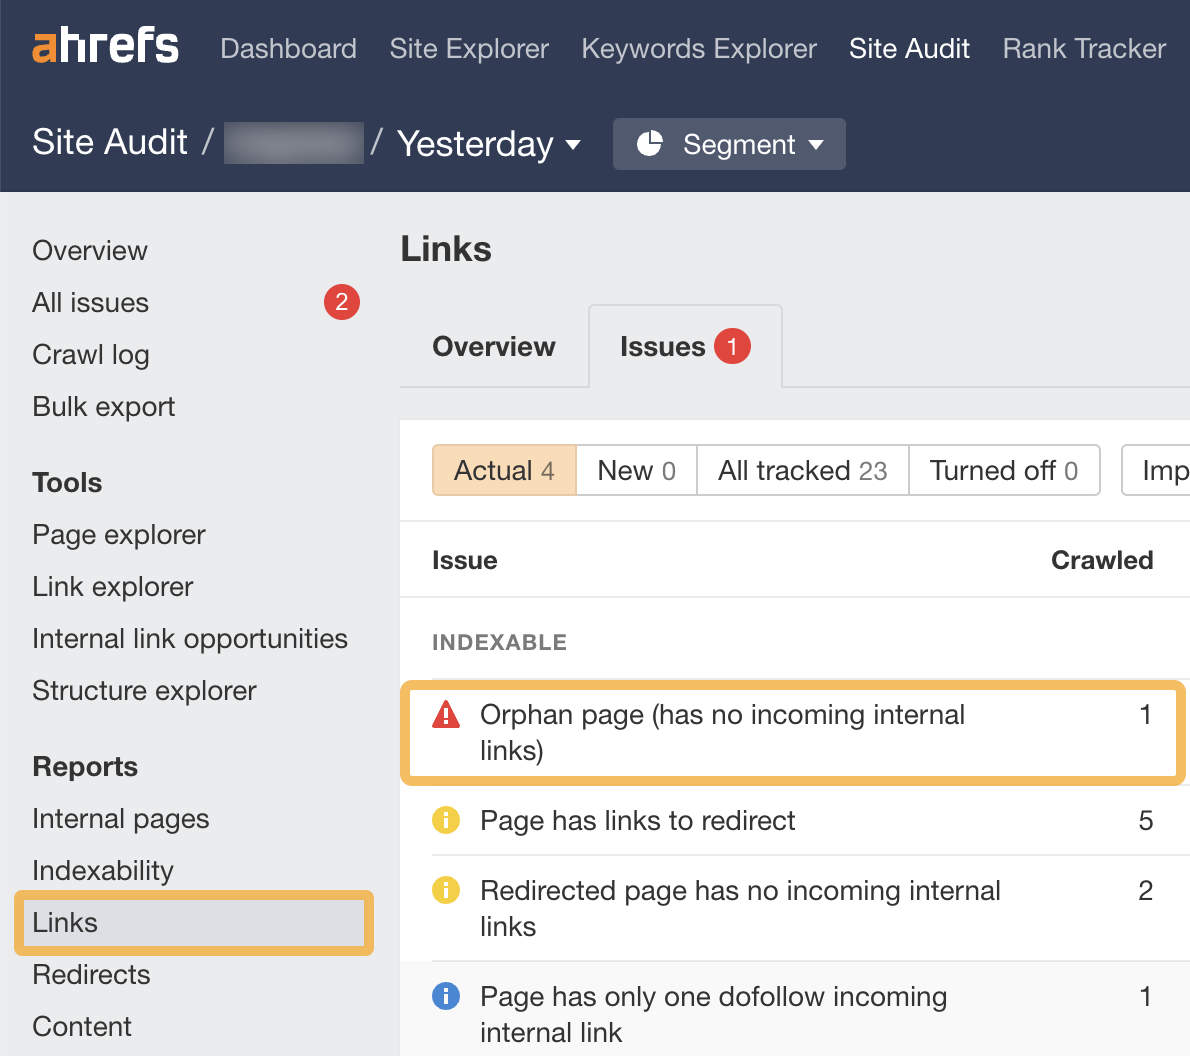 Locating orphan pages that have no incoming internal links, via Ahrefs' Site Audit
